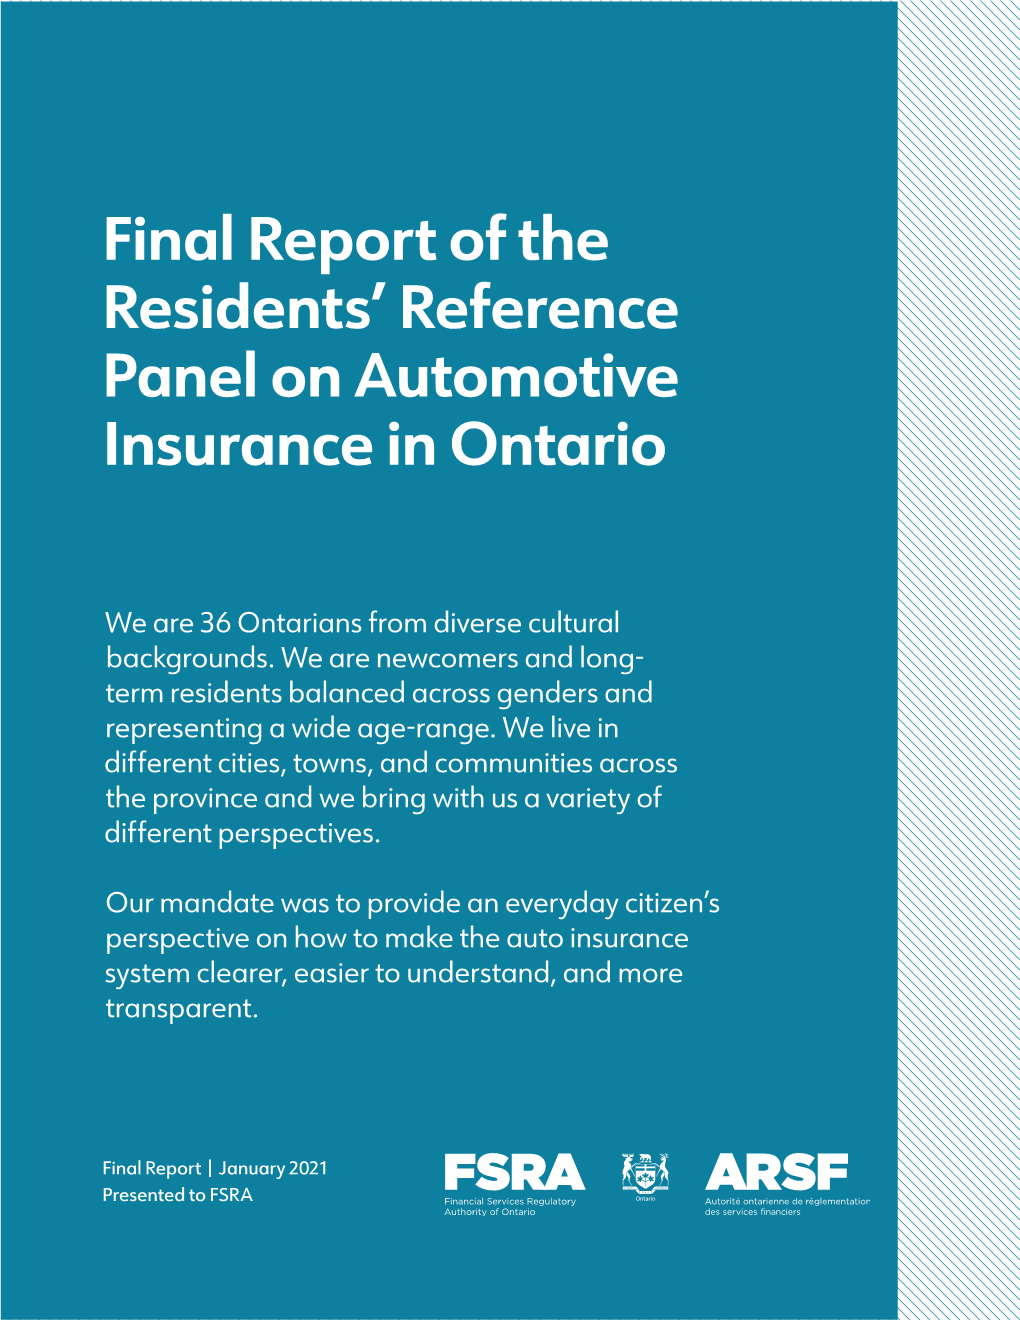 Final Report of the Residents' Reference Panel on Automotive